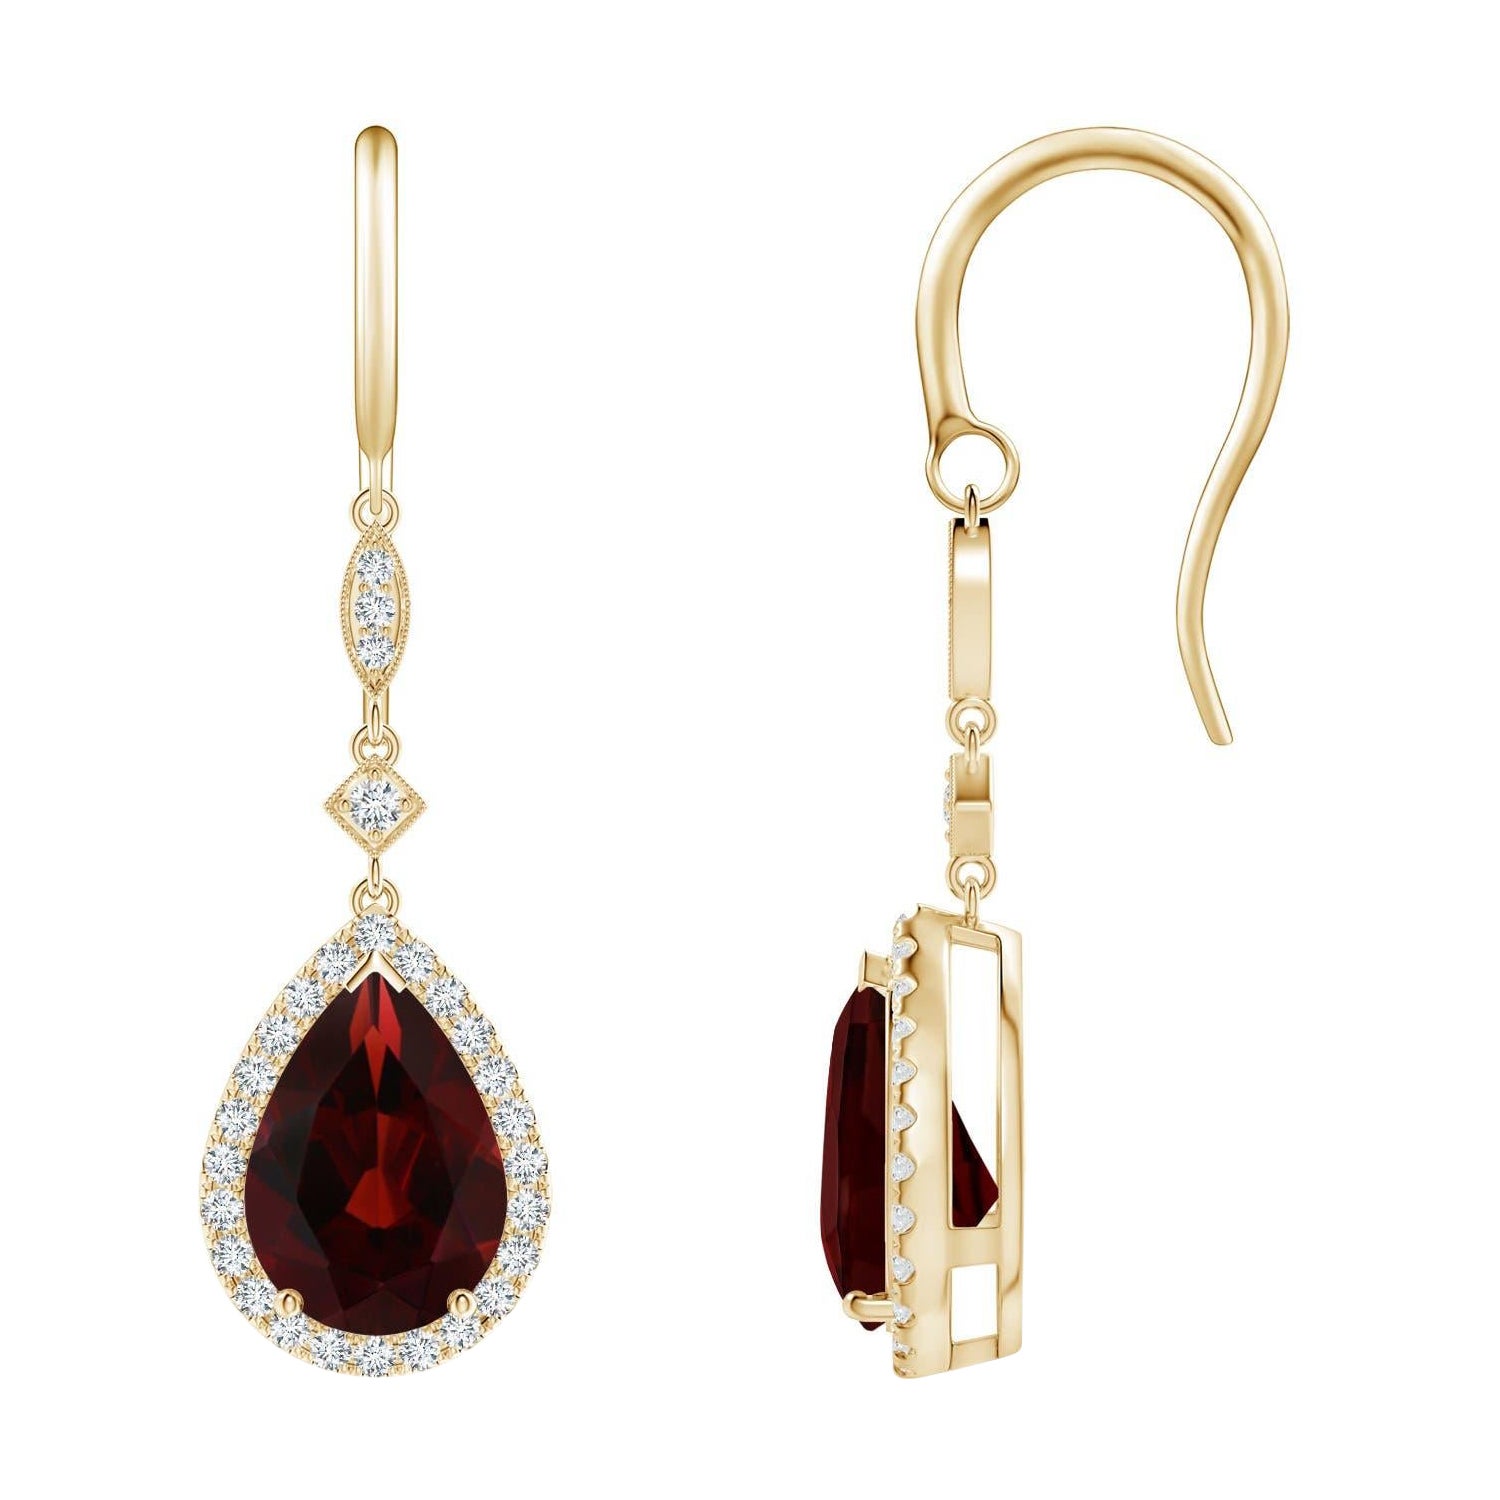 Natural Pear-Shaped 4.2ct Garnet Drop Earrings with Diamond in 14K Yellow Gold For Sale